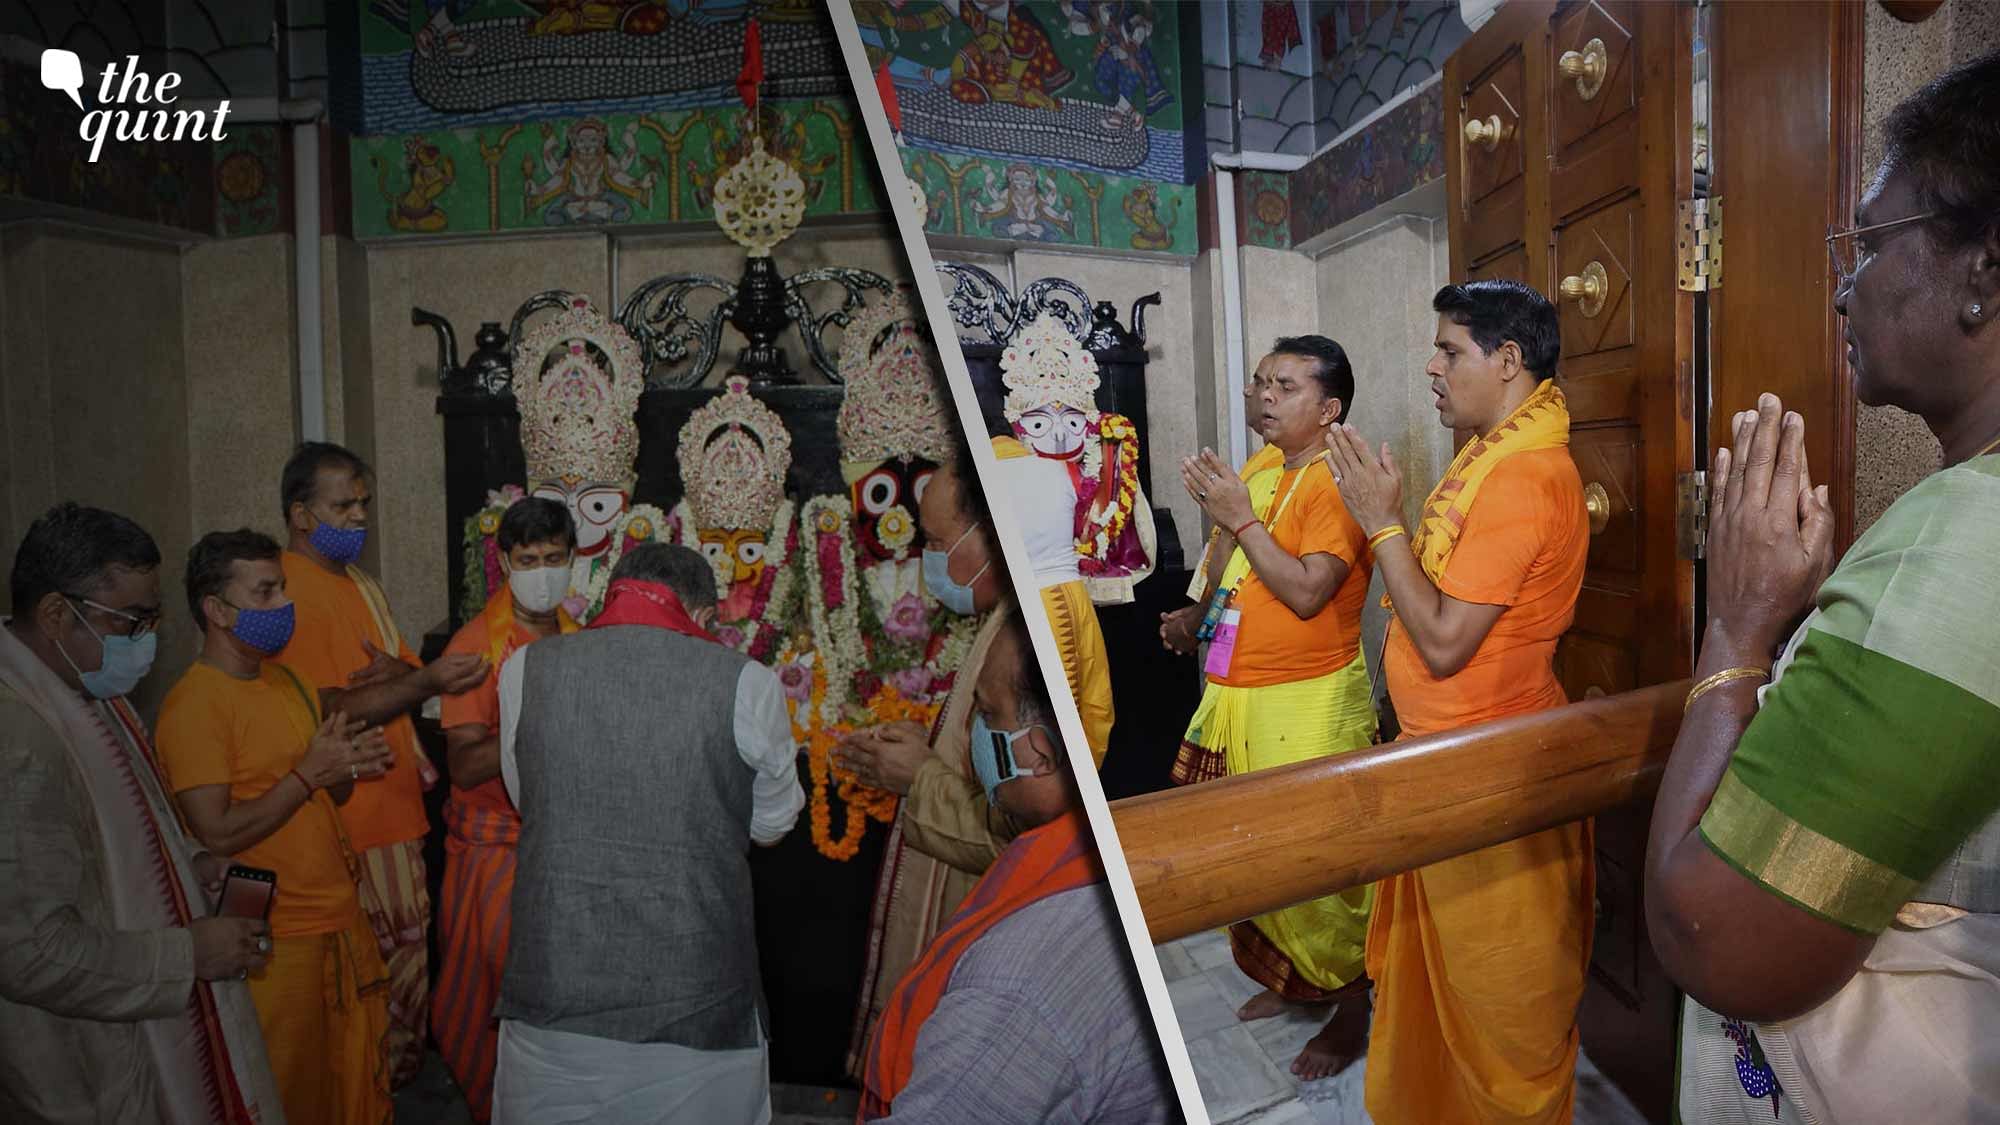 <div class="paragraphs"><p>Murmu visited the Lord Jagannath temple in Delhi's Hauz Khas village on Tuesday, 20 June, on the occasion of the commencement of the annual rath yatra.</p></div>